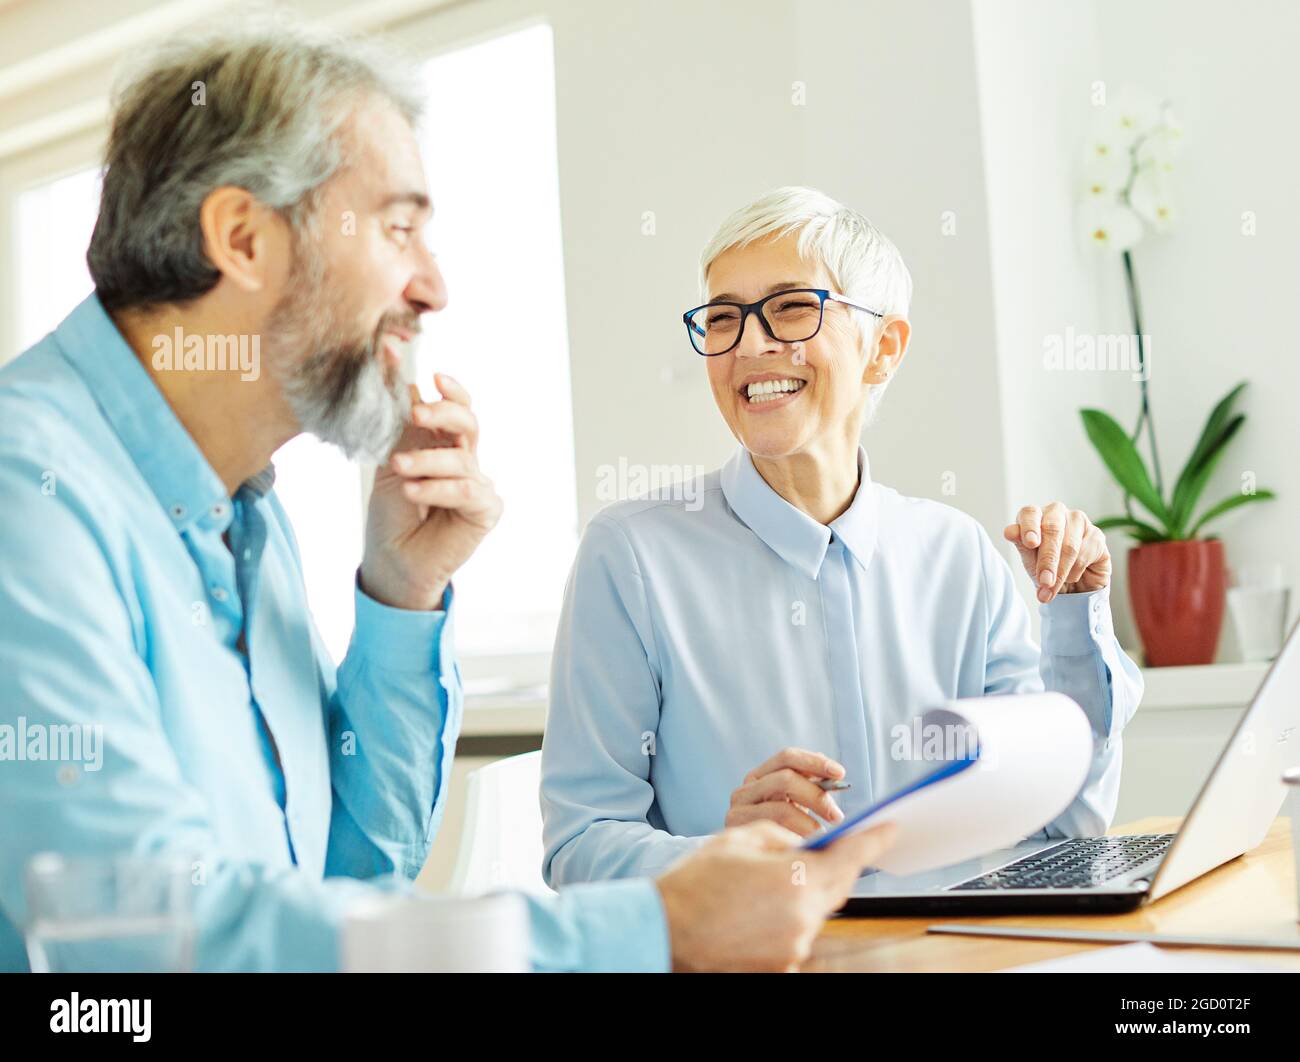 business office person discussion laptop teamwork senior meeting businesswoman businessman together Stock Photo